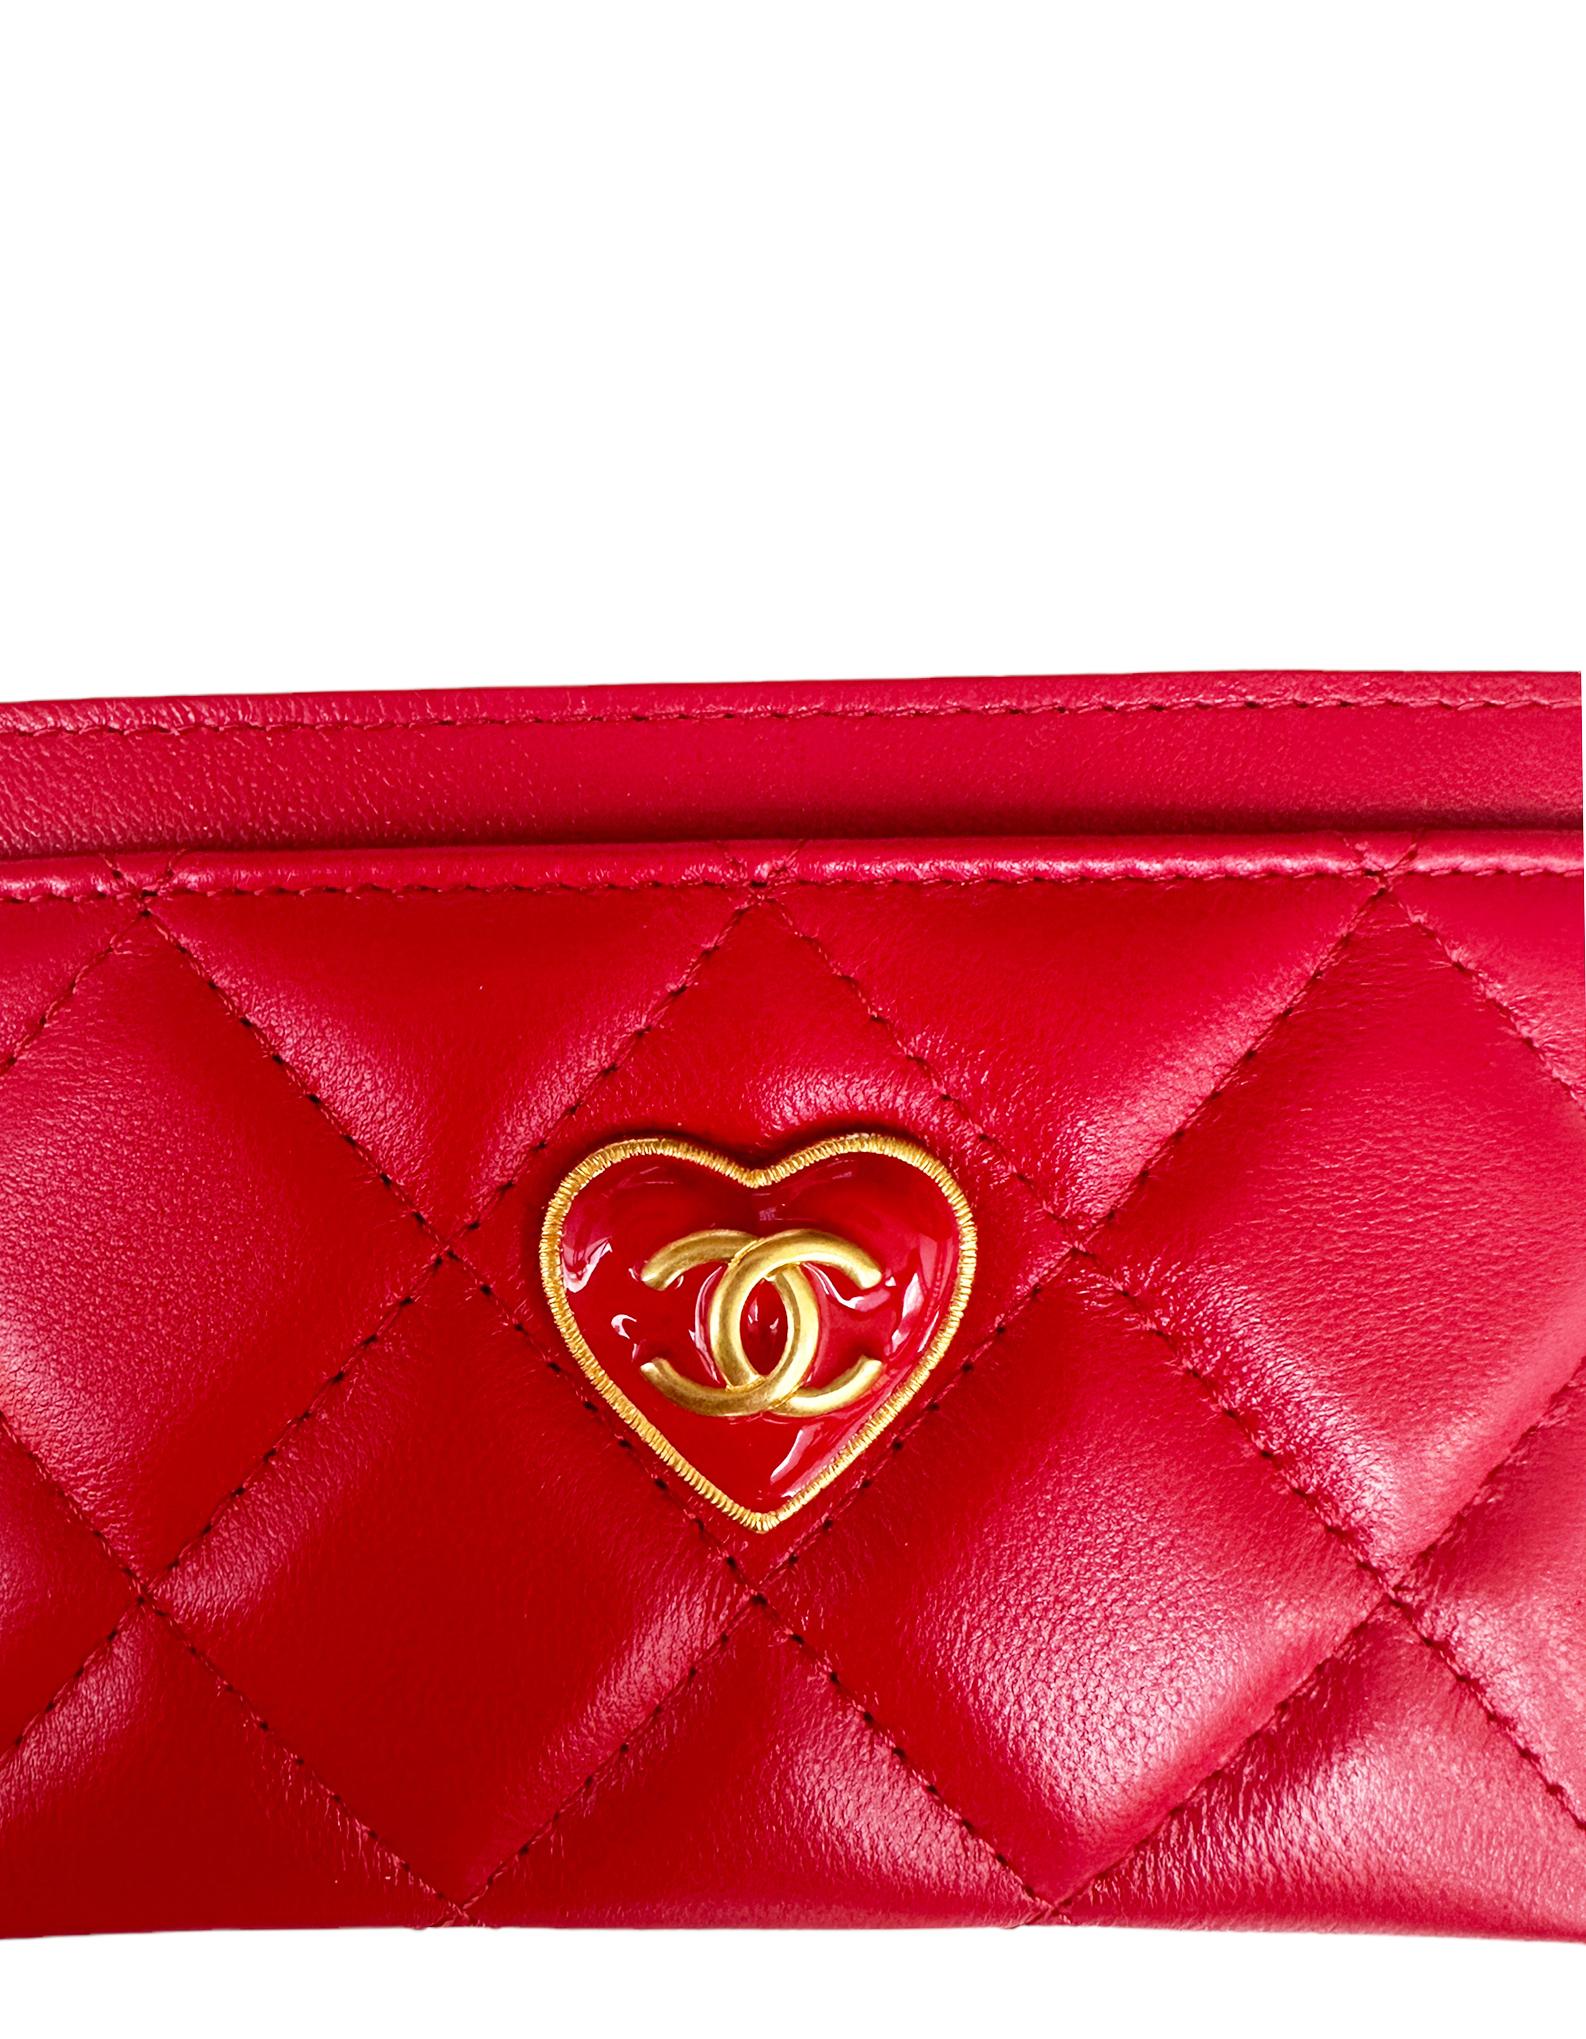 Chanel NEW 2023 Red Lambskin Quilted Resin CC Heart Card Holder

Made In: Italy
Color: Red
Hardware: Goldtone
Materials: Lambskin leather
Lining: Grosgrain
Four credit card slots
Exterior Condition: Like new
Interior Condition: Like new
Includes: